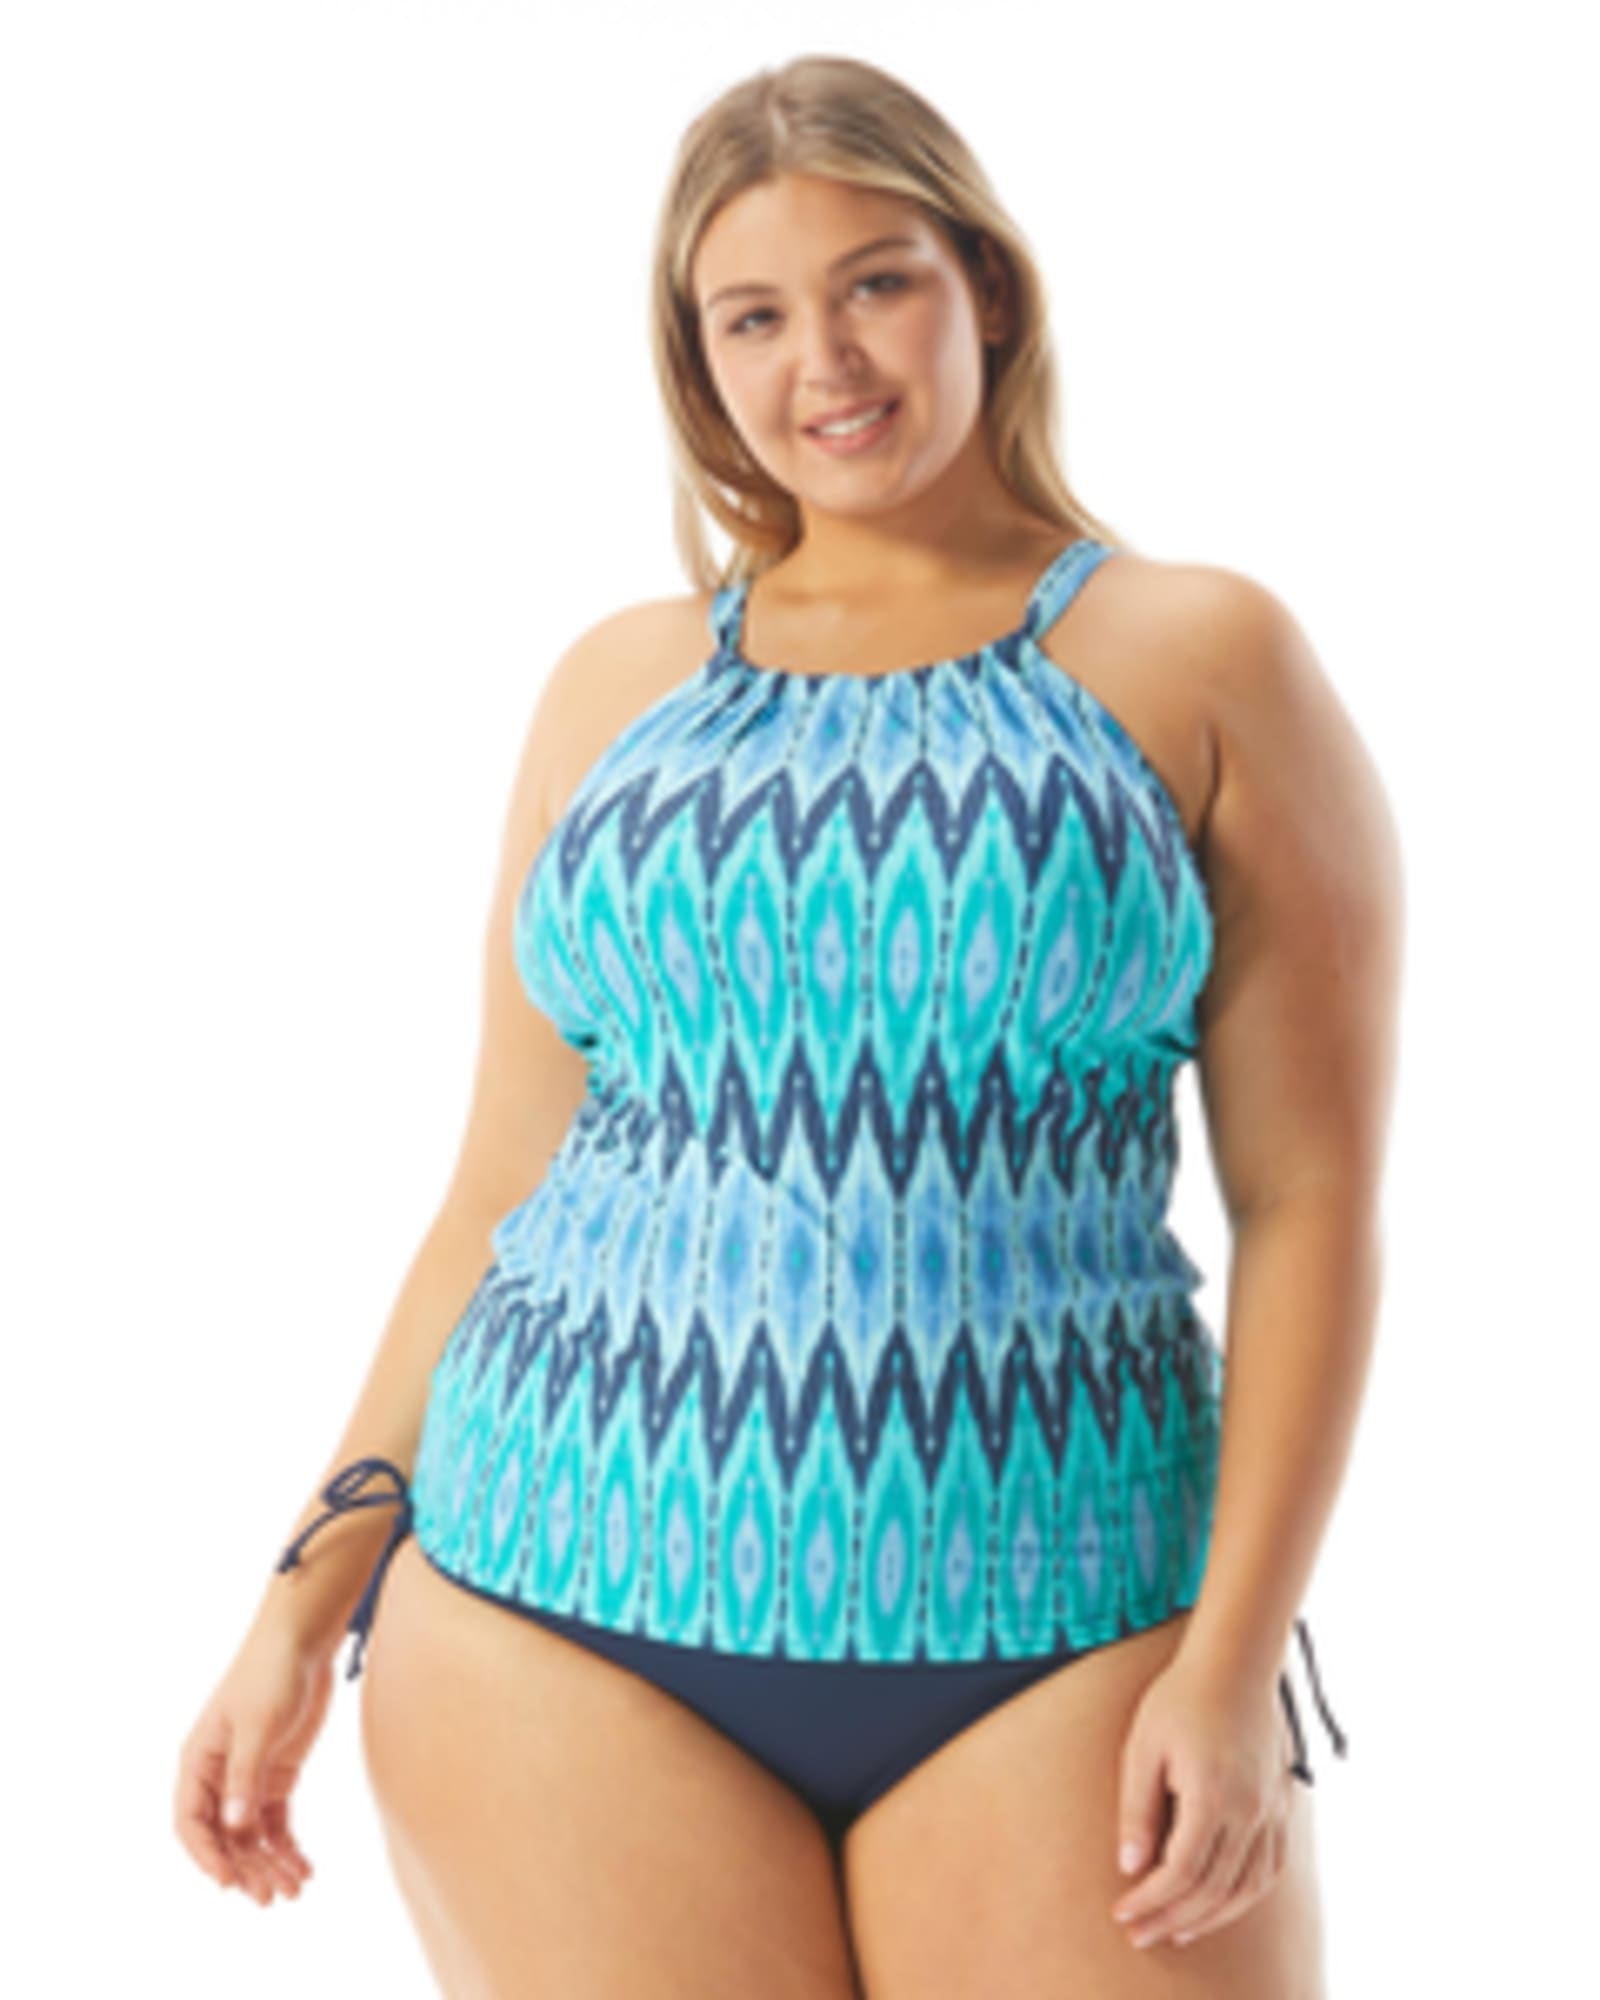 Chlorine Resistant Swimsuits : The Benefits